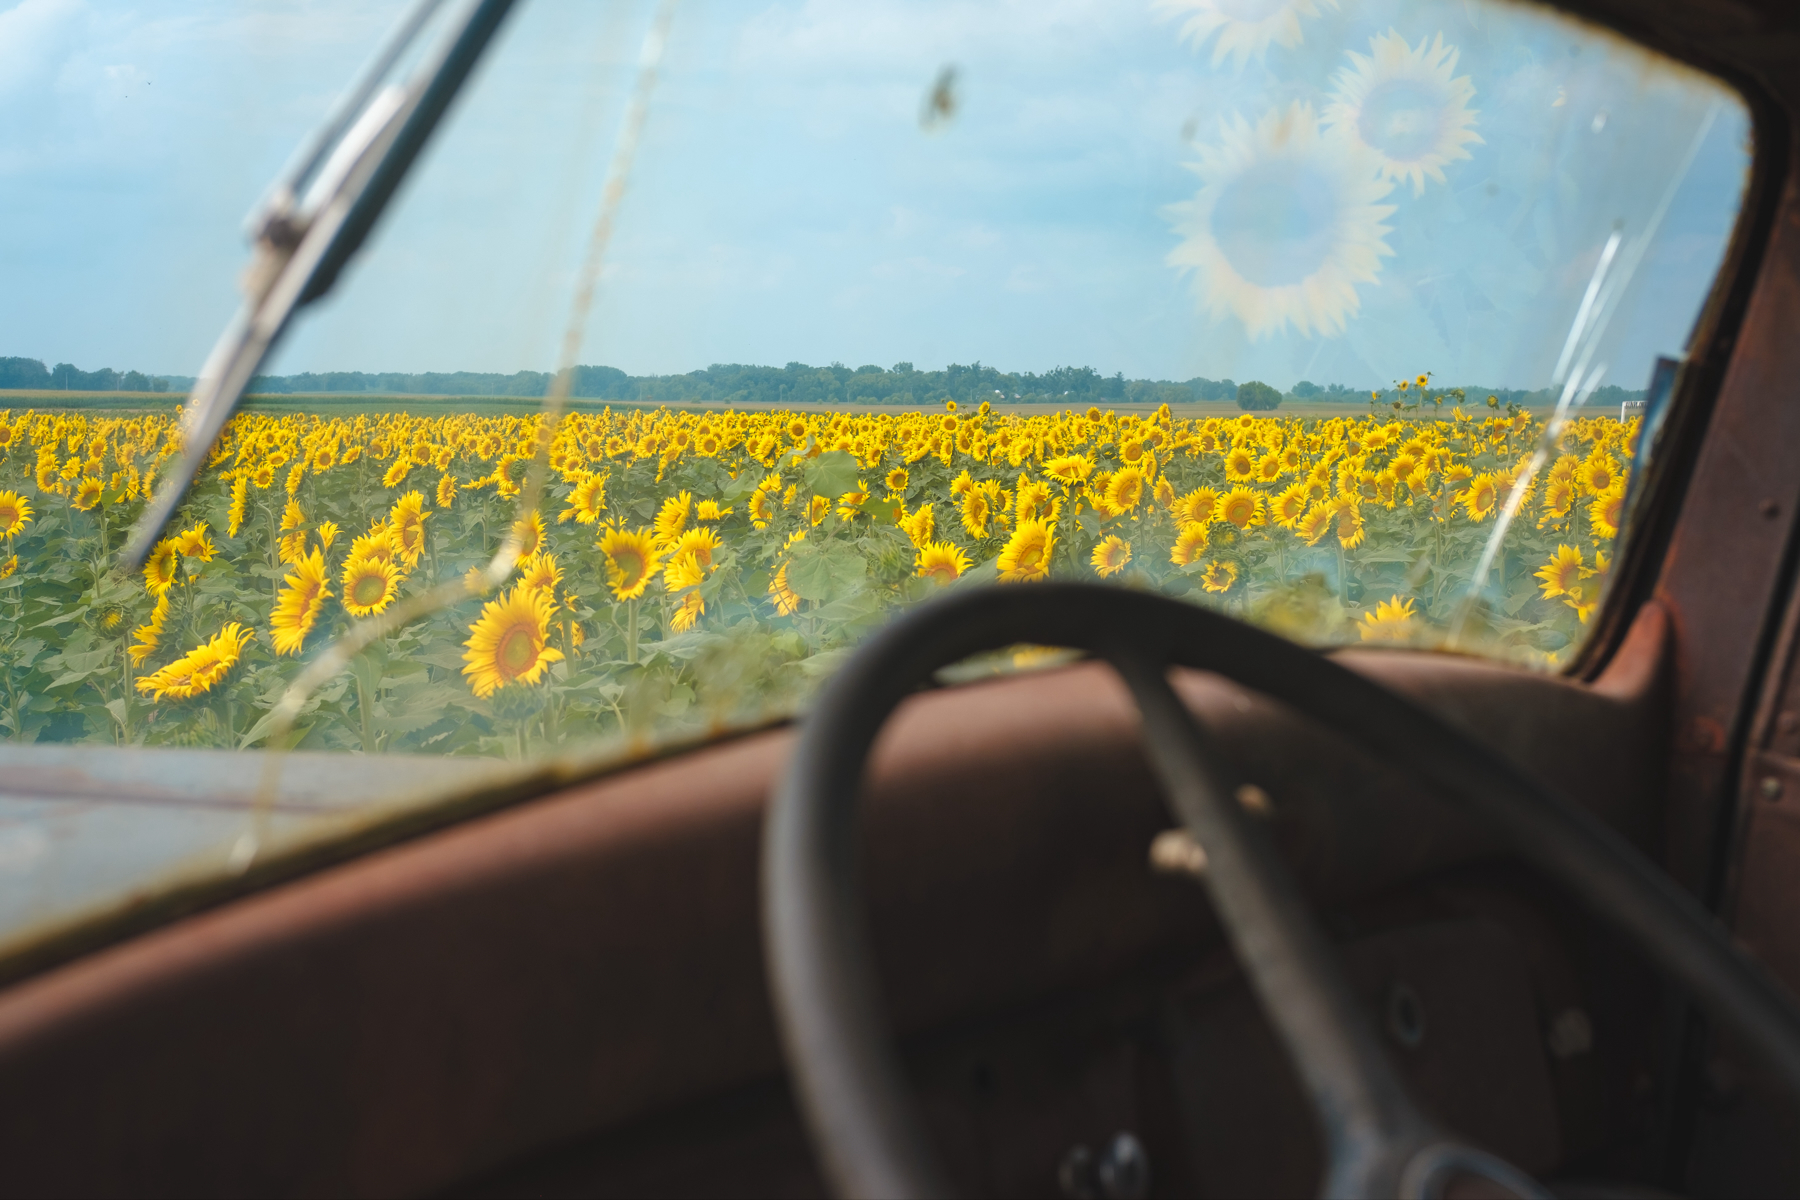 A field of sunflowers viewed from the interior of a vehicle, with the vehicle’s steering wheel visible in the foreground and sunflower reflections on the windshield.